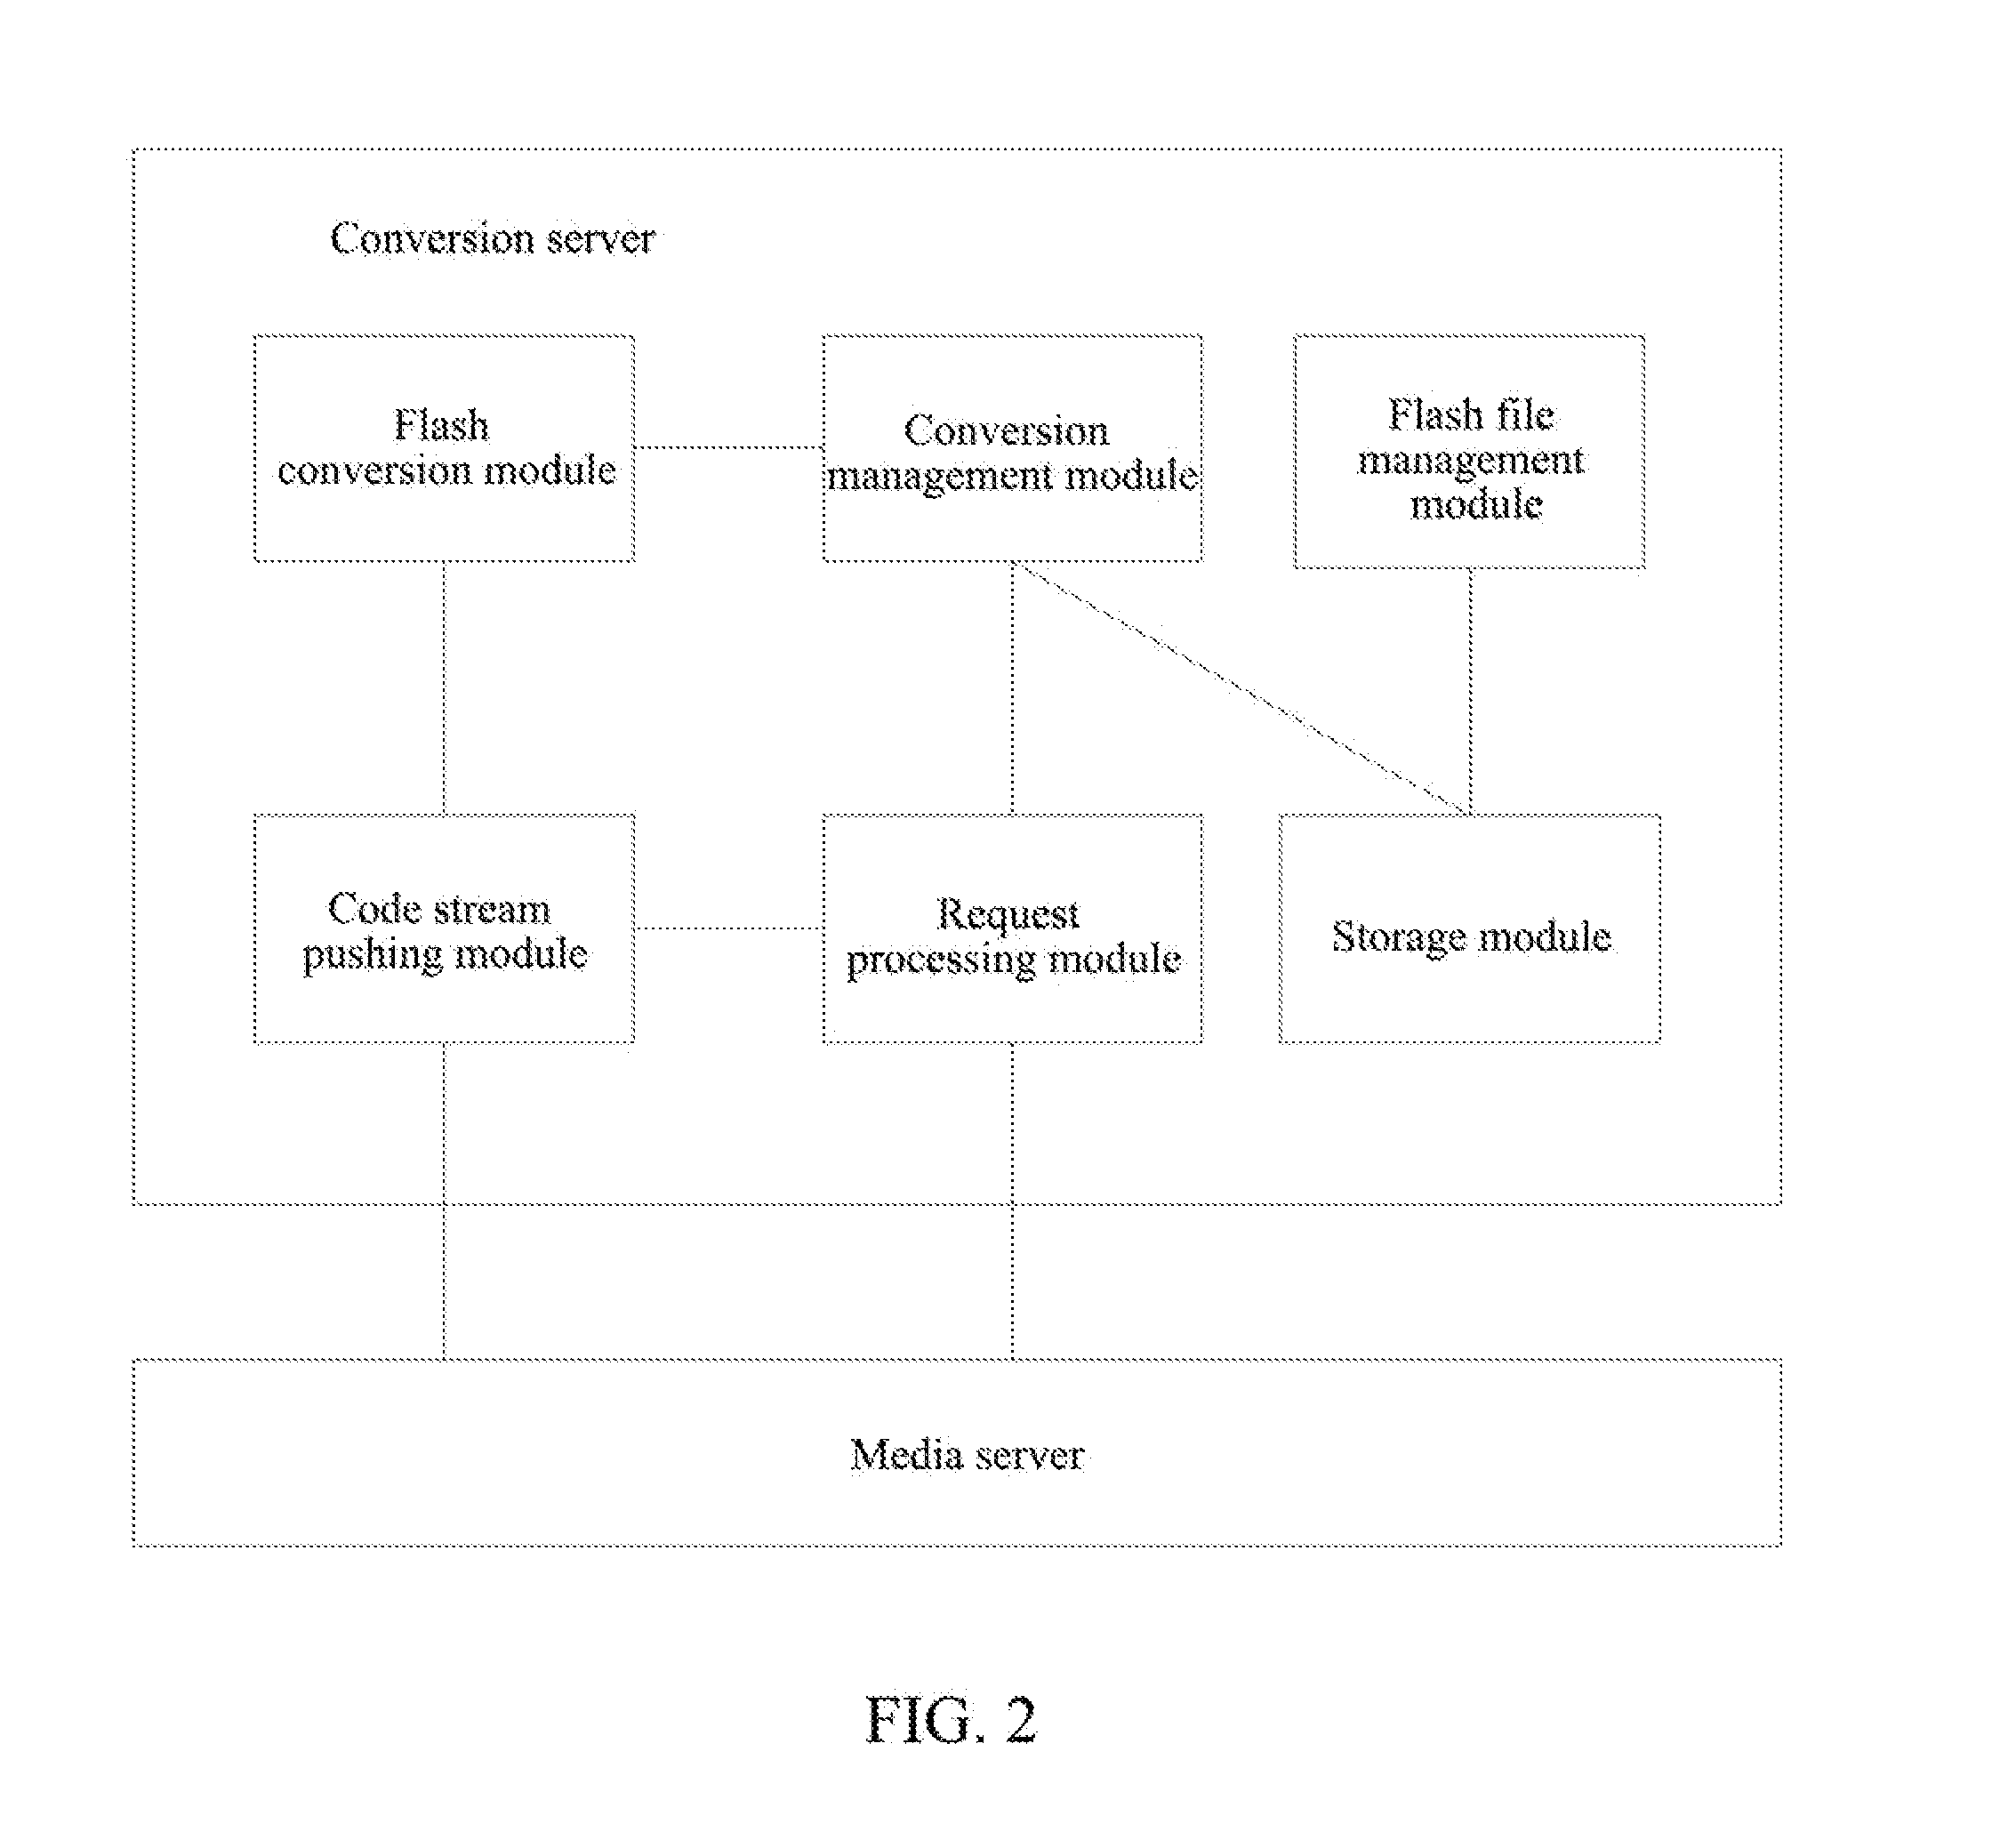 System and Method for Generating Flash-Based Media Stream